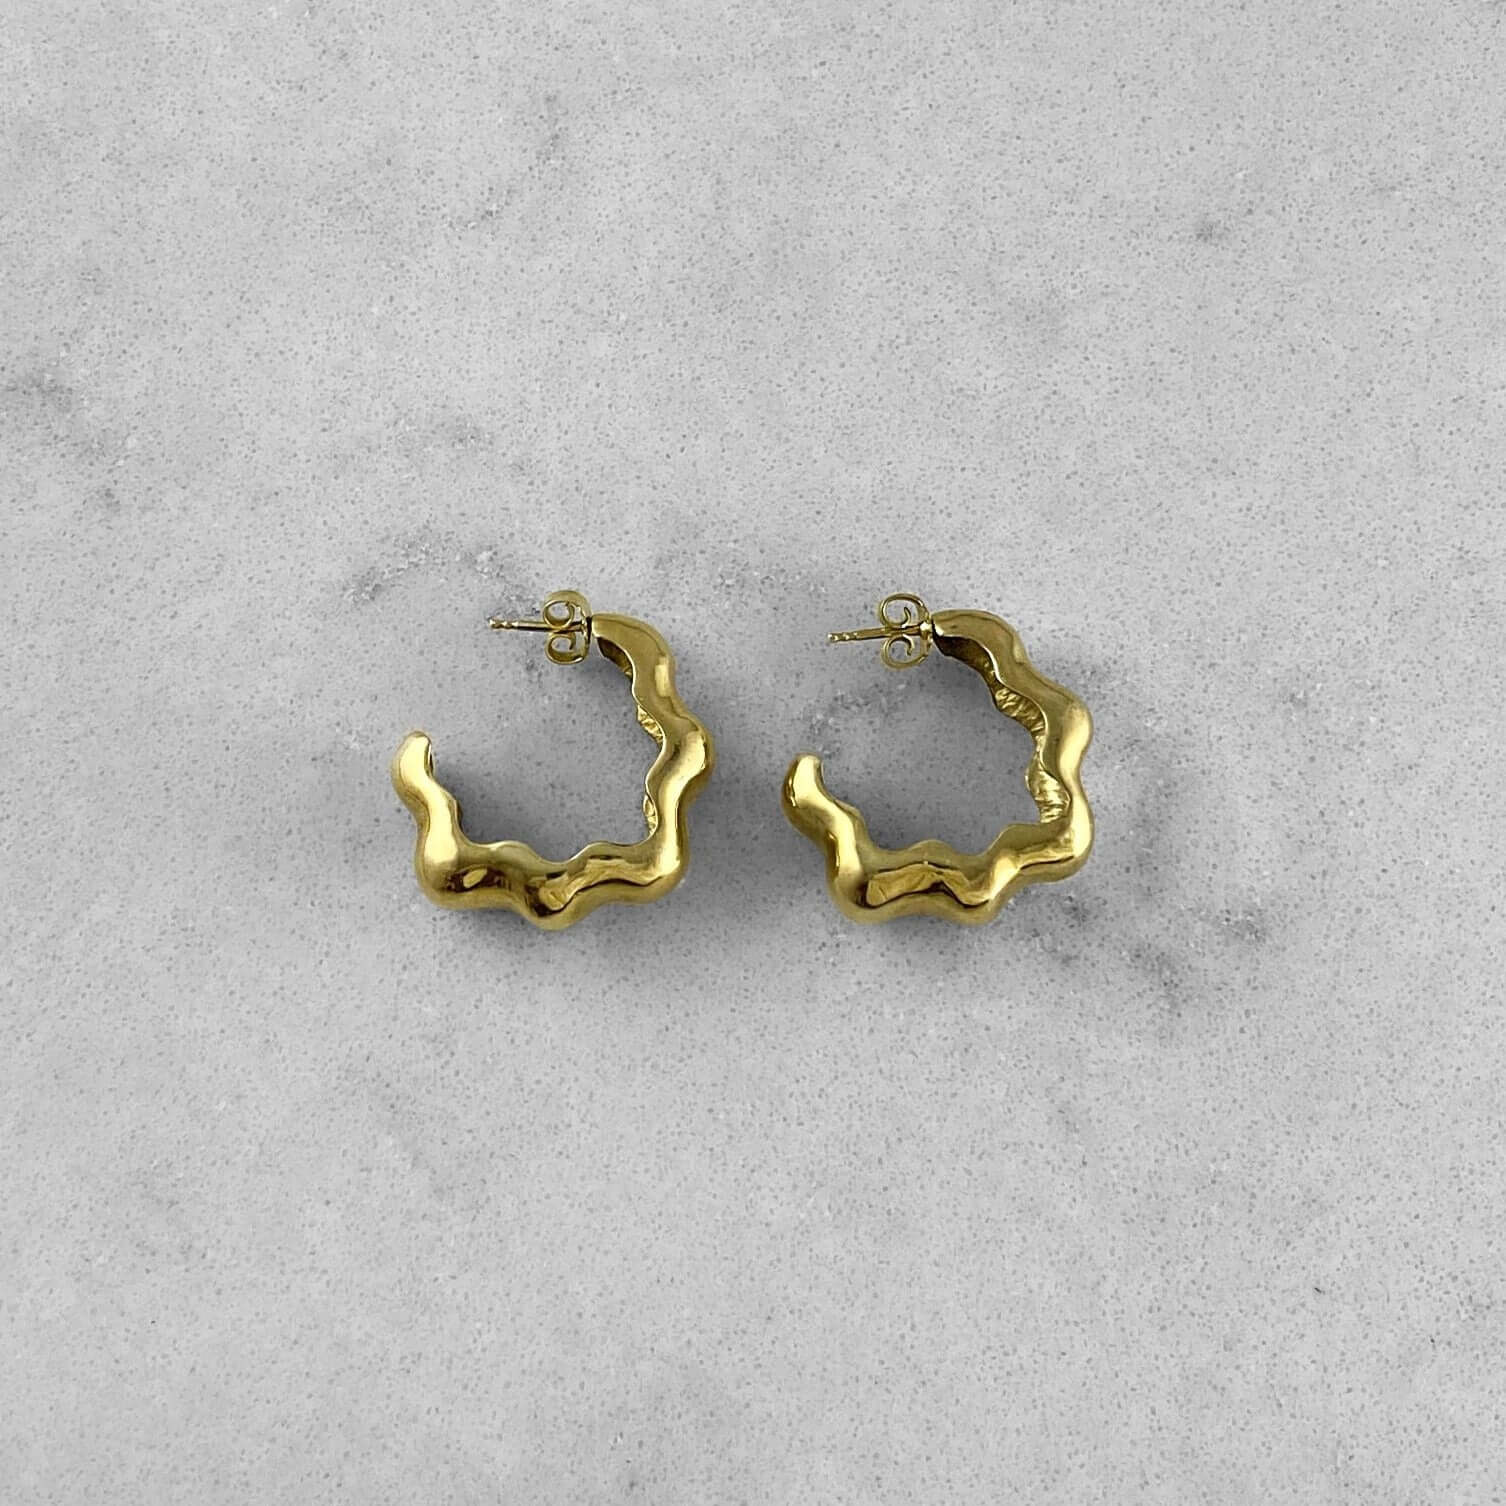 Product photo of a pair of gold hoops laying on marble